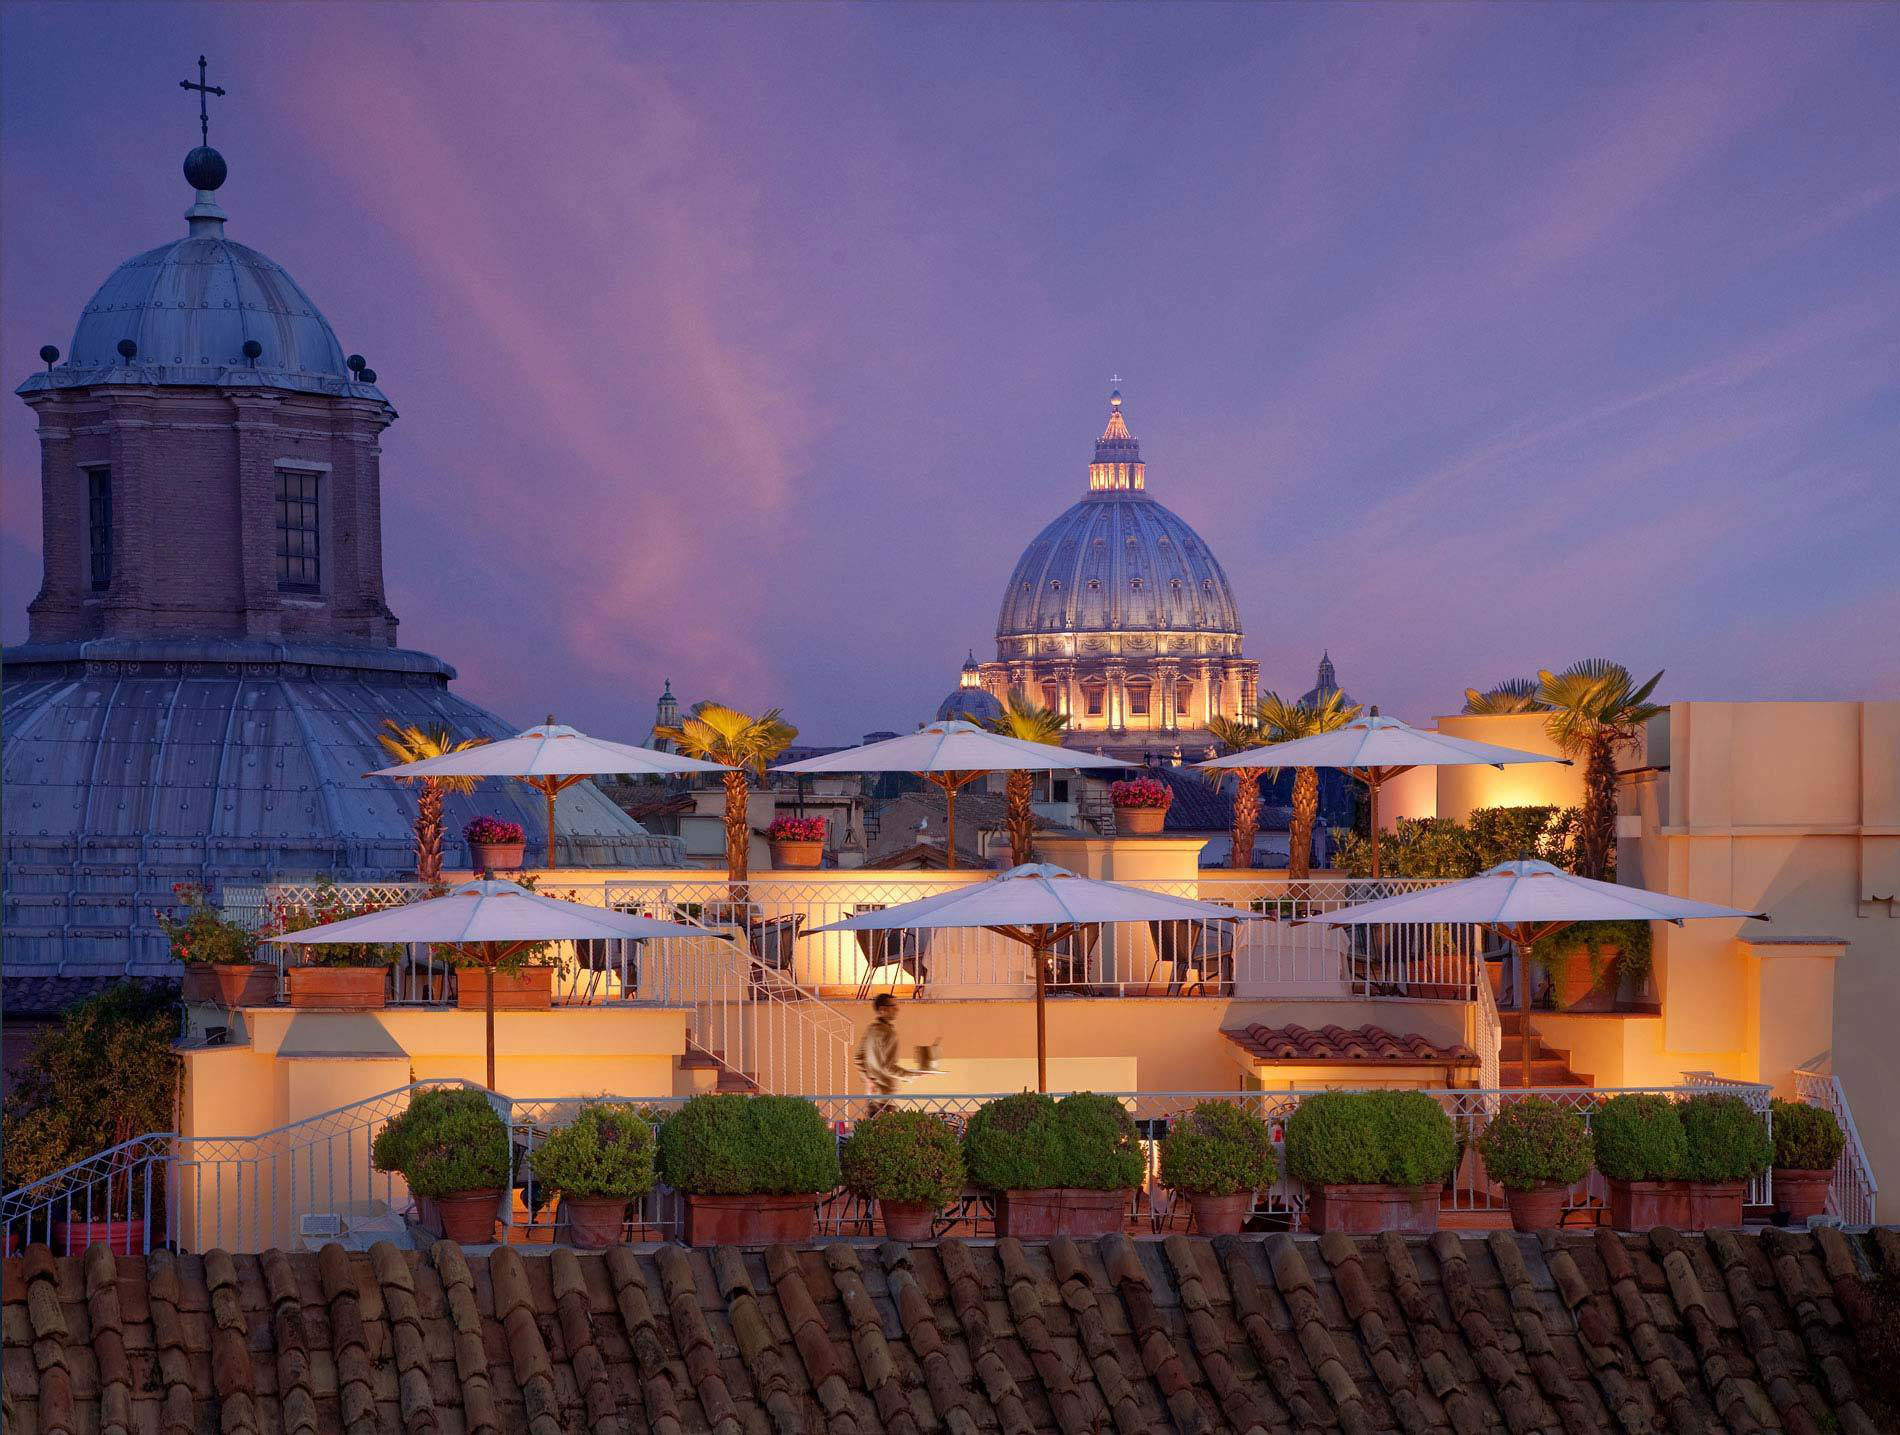 Hotel Raphaël, Rome. All images courtesy of the hotels